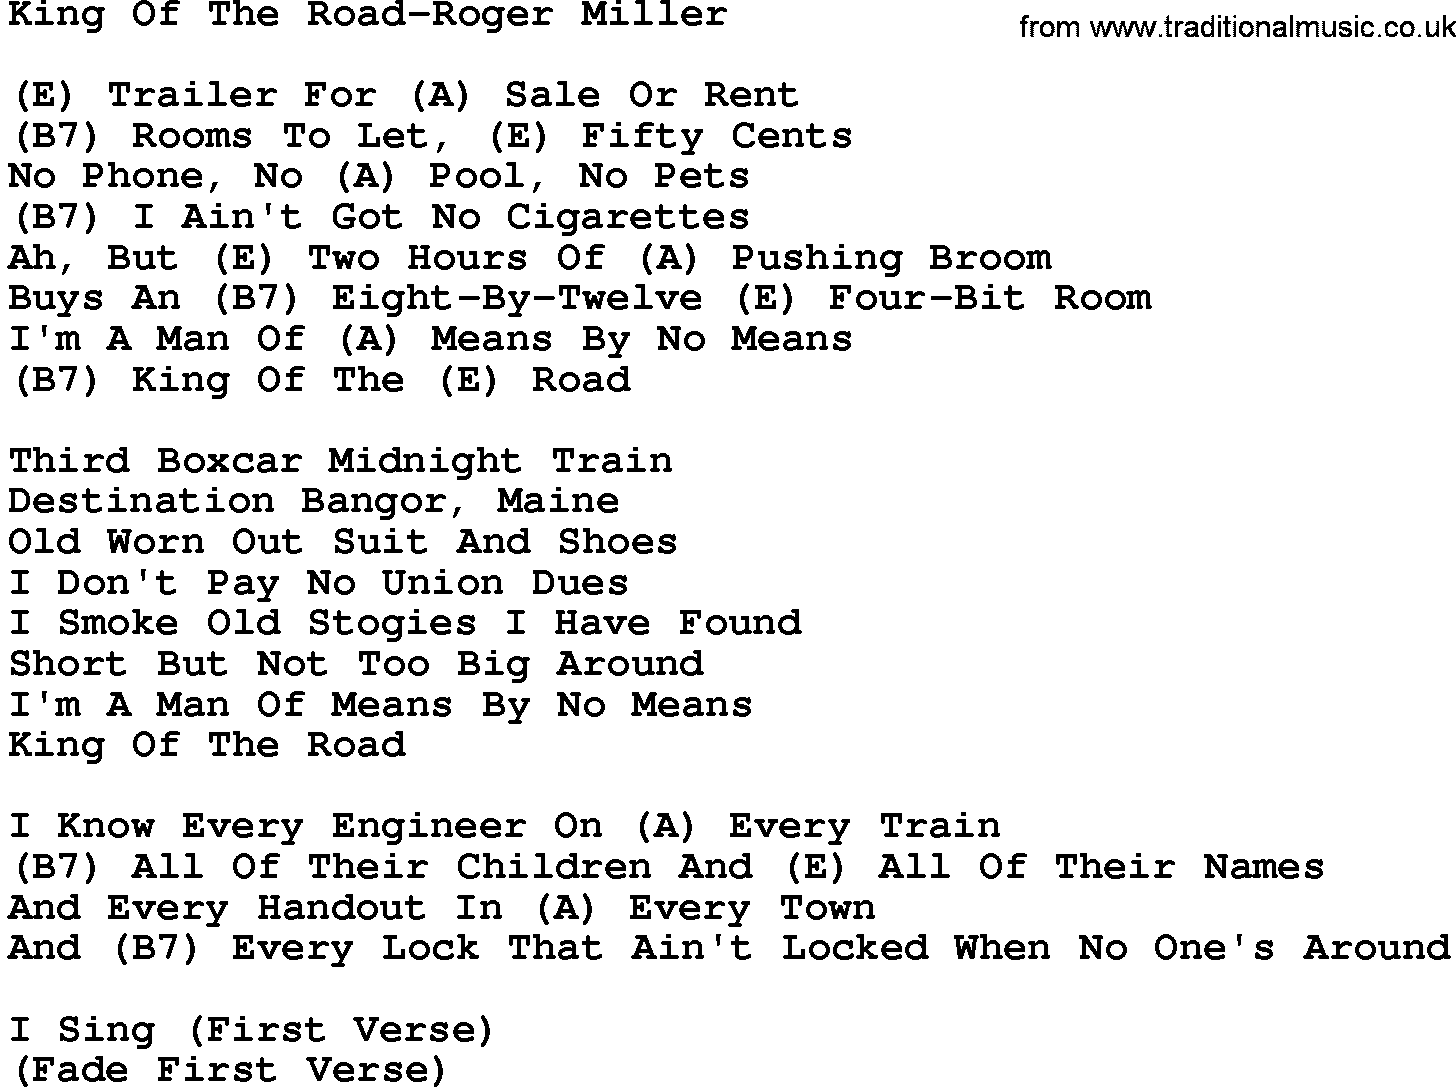 Country music song: King Of The Road-Roger Miller lyrics and chords